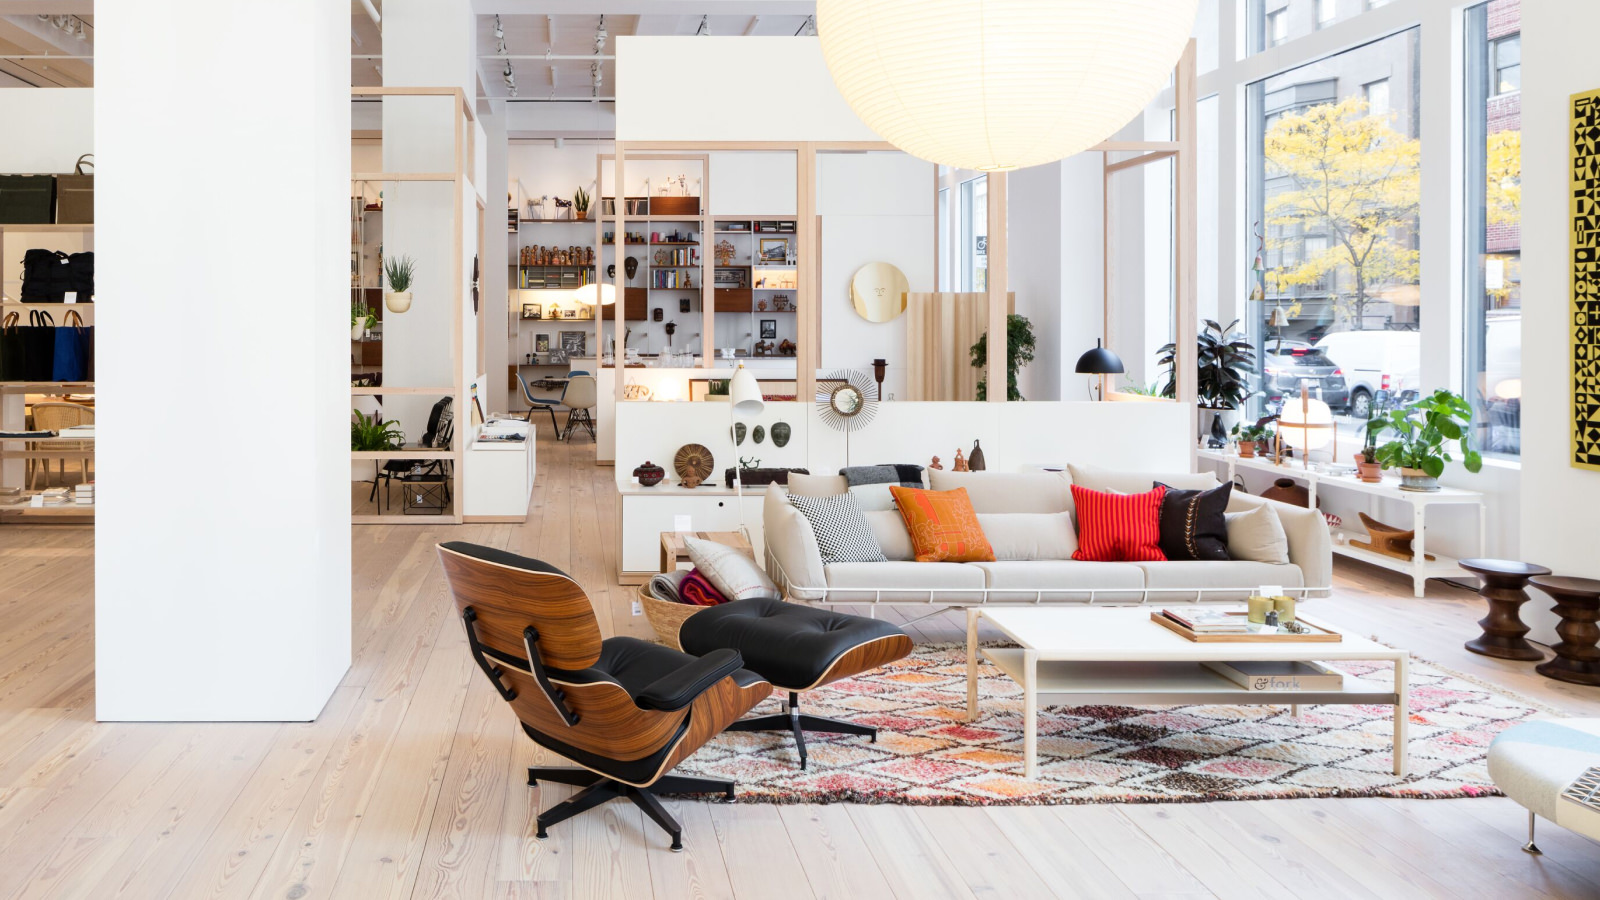 Herman Miller's New York showroom featuring an Eames Lounge Chair and Ottoman and a Wireframe Sofa.